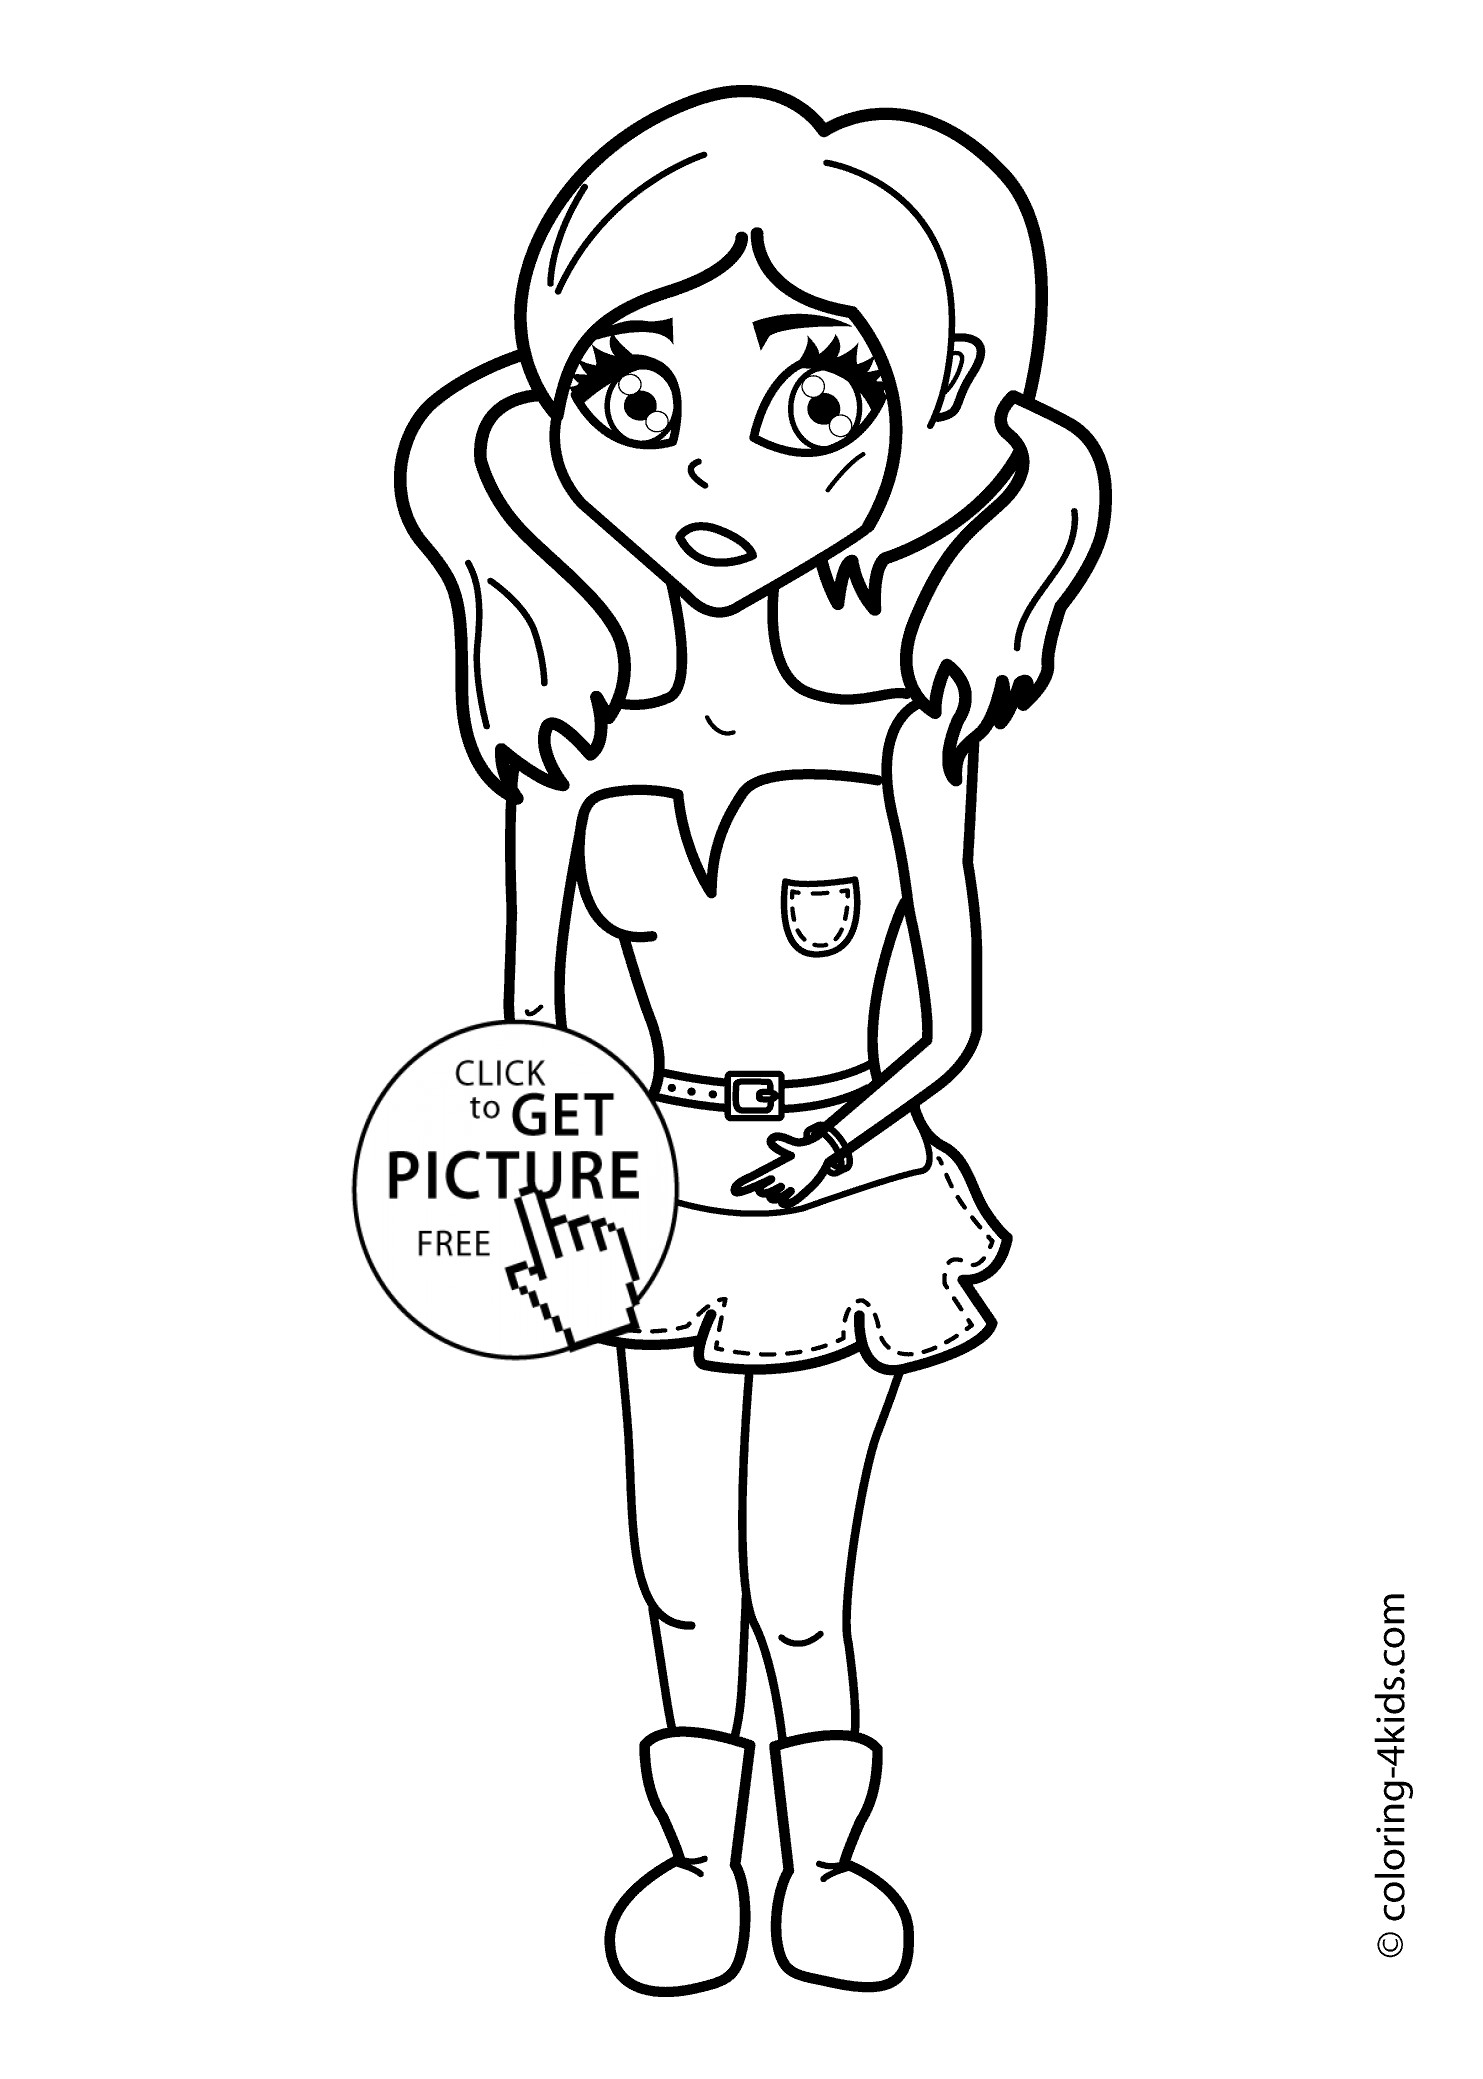 Kawaii Coloring Pages For Girls
 Cute coloring pages for girls printable coloring pages